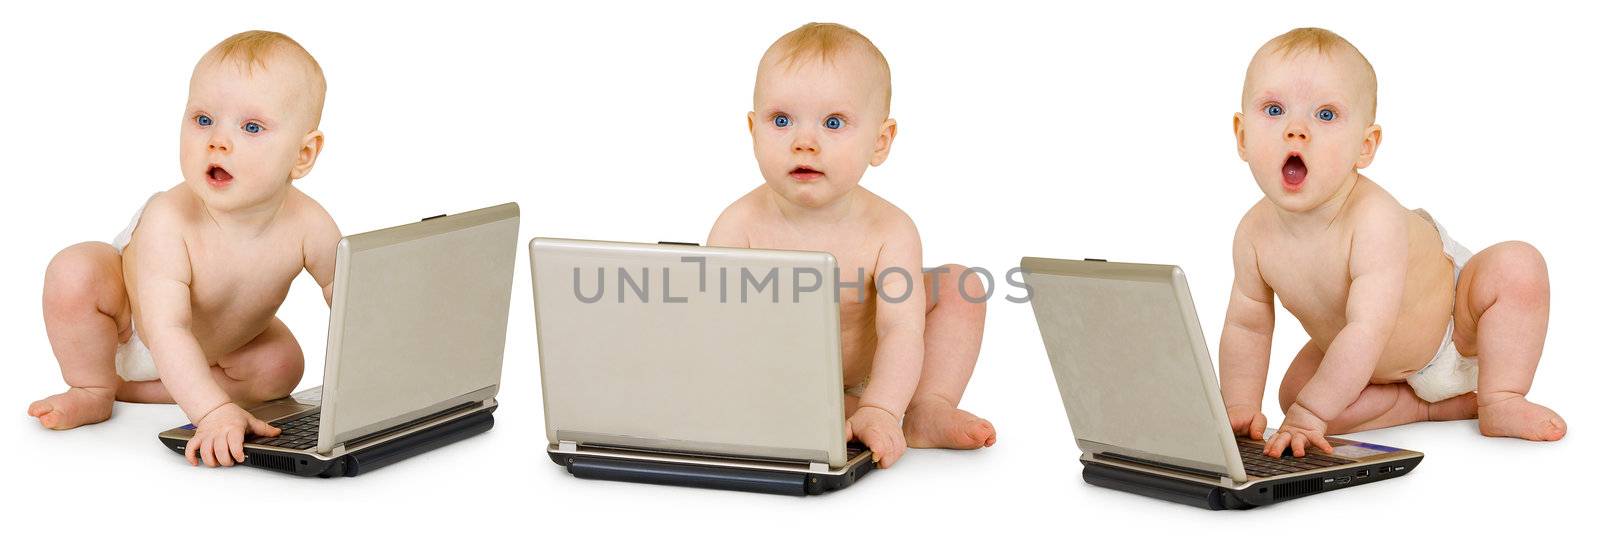 Three baby in diapers with laptops on white by pzaxe